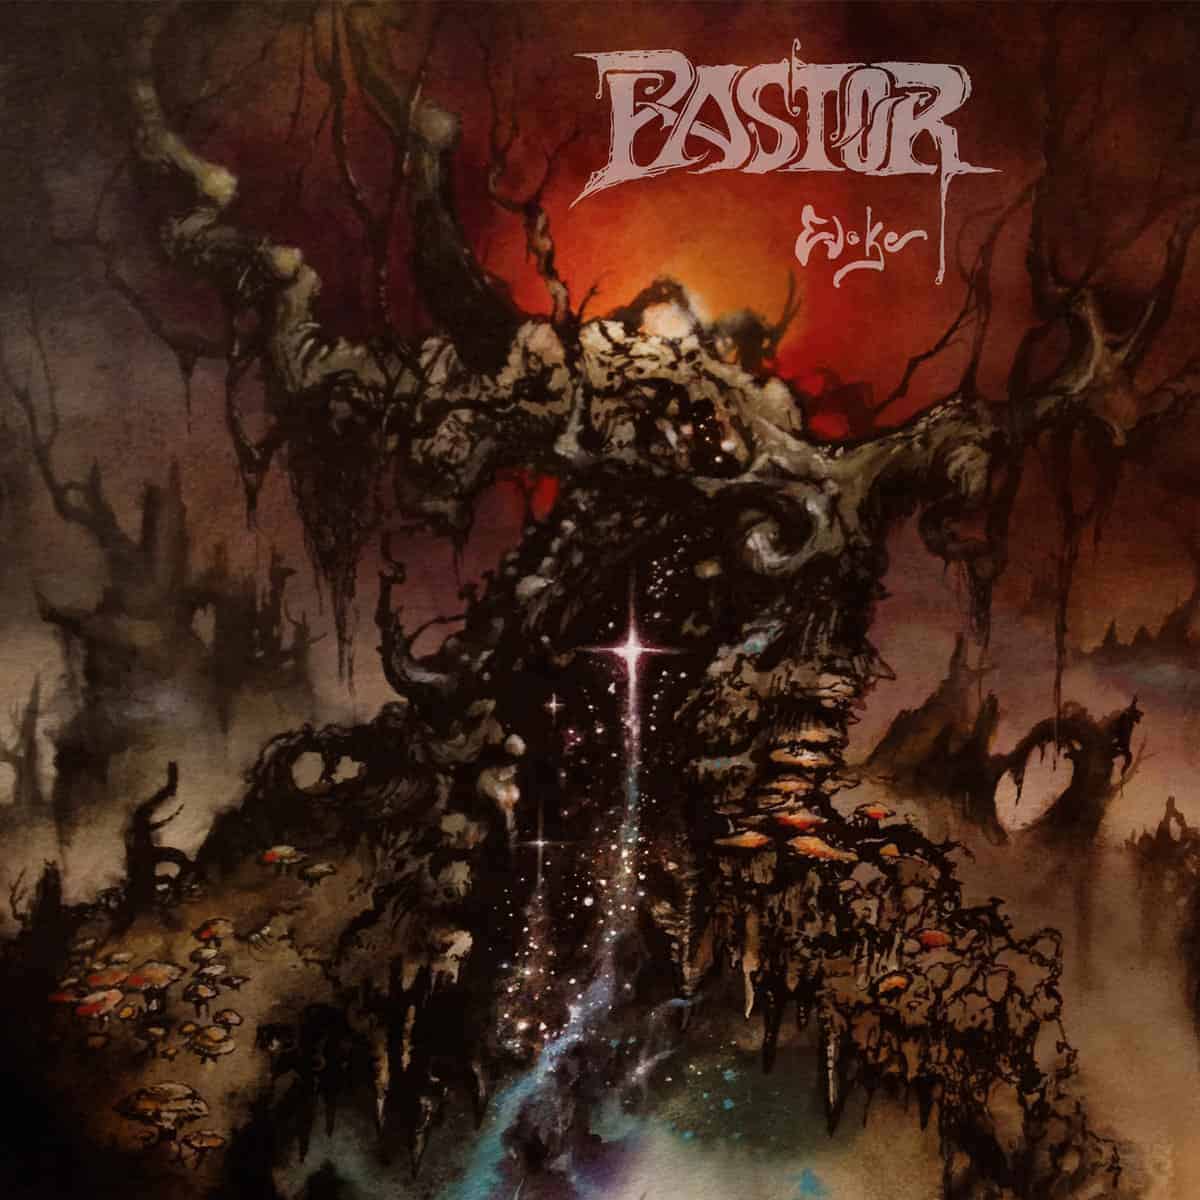 Pastor - Evoke LP (WhoCanYouTrust) “The PASTOR LP was done within five days. The recording dates were set pretty quickly after we decided to hit the studio so we had no time to work on the songs or think a lot about details, but we wanted it just that way. Chris from Who Can You Trust? Records was down with us again and we just had to do it. “Evoke” is basically a collection of our heaviest riffs we jammed in our rehearsal room and it’s raw. It was recorded without a click track because let’s be honest, life won’t play to a steady beat either. We also didn’t do any of the usual post production fancy stuff because that’s just not us. Some of them songs were written in a hellish atmosphere, during the summer and some of them during the frosty days of a vienna winter. I think you can hear that difference on the album pretty well. We entered the mighty halls of Elephant West Studios, with lady Sabina Sloth on the throne, chugged down some beers and just played all together in one room. We are more than excited about the result and the artwork, which was crafted by none other than Adam Burke. So sit back and turn your speakers all the way up until your whole neighborhood joins you for a drink. Enjoy the sounds of Evoke.”